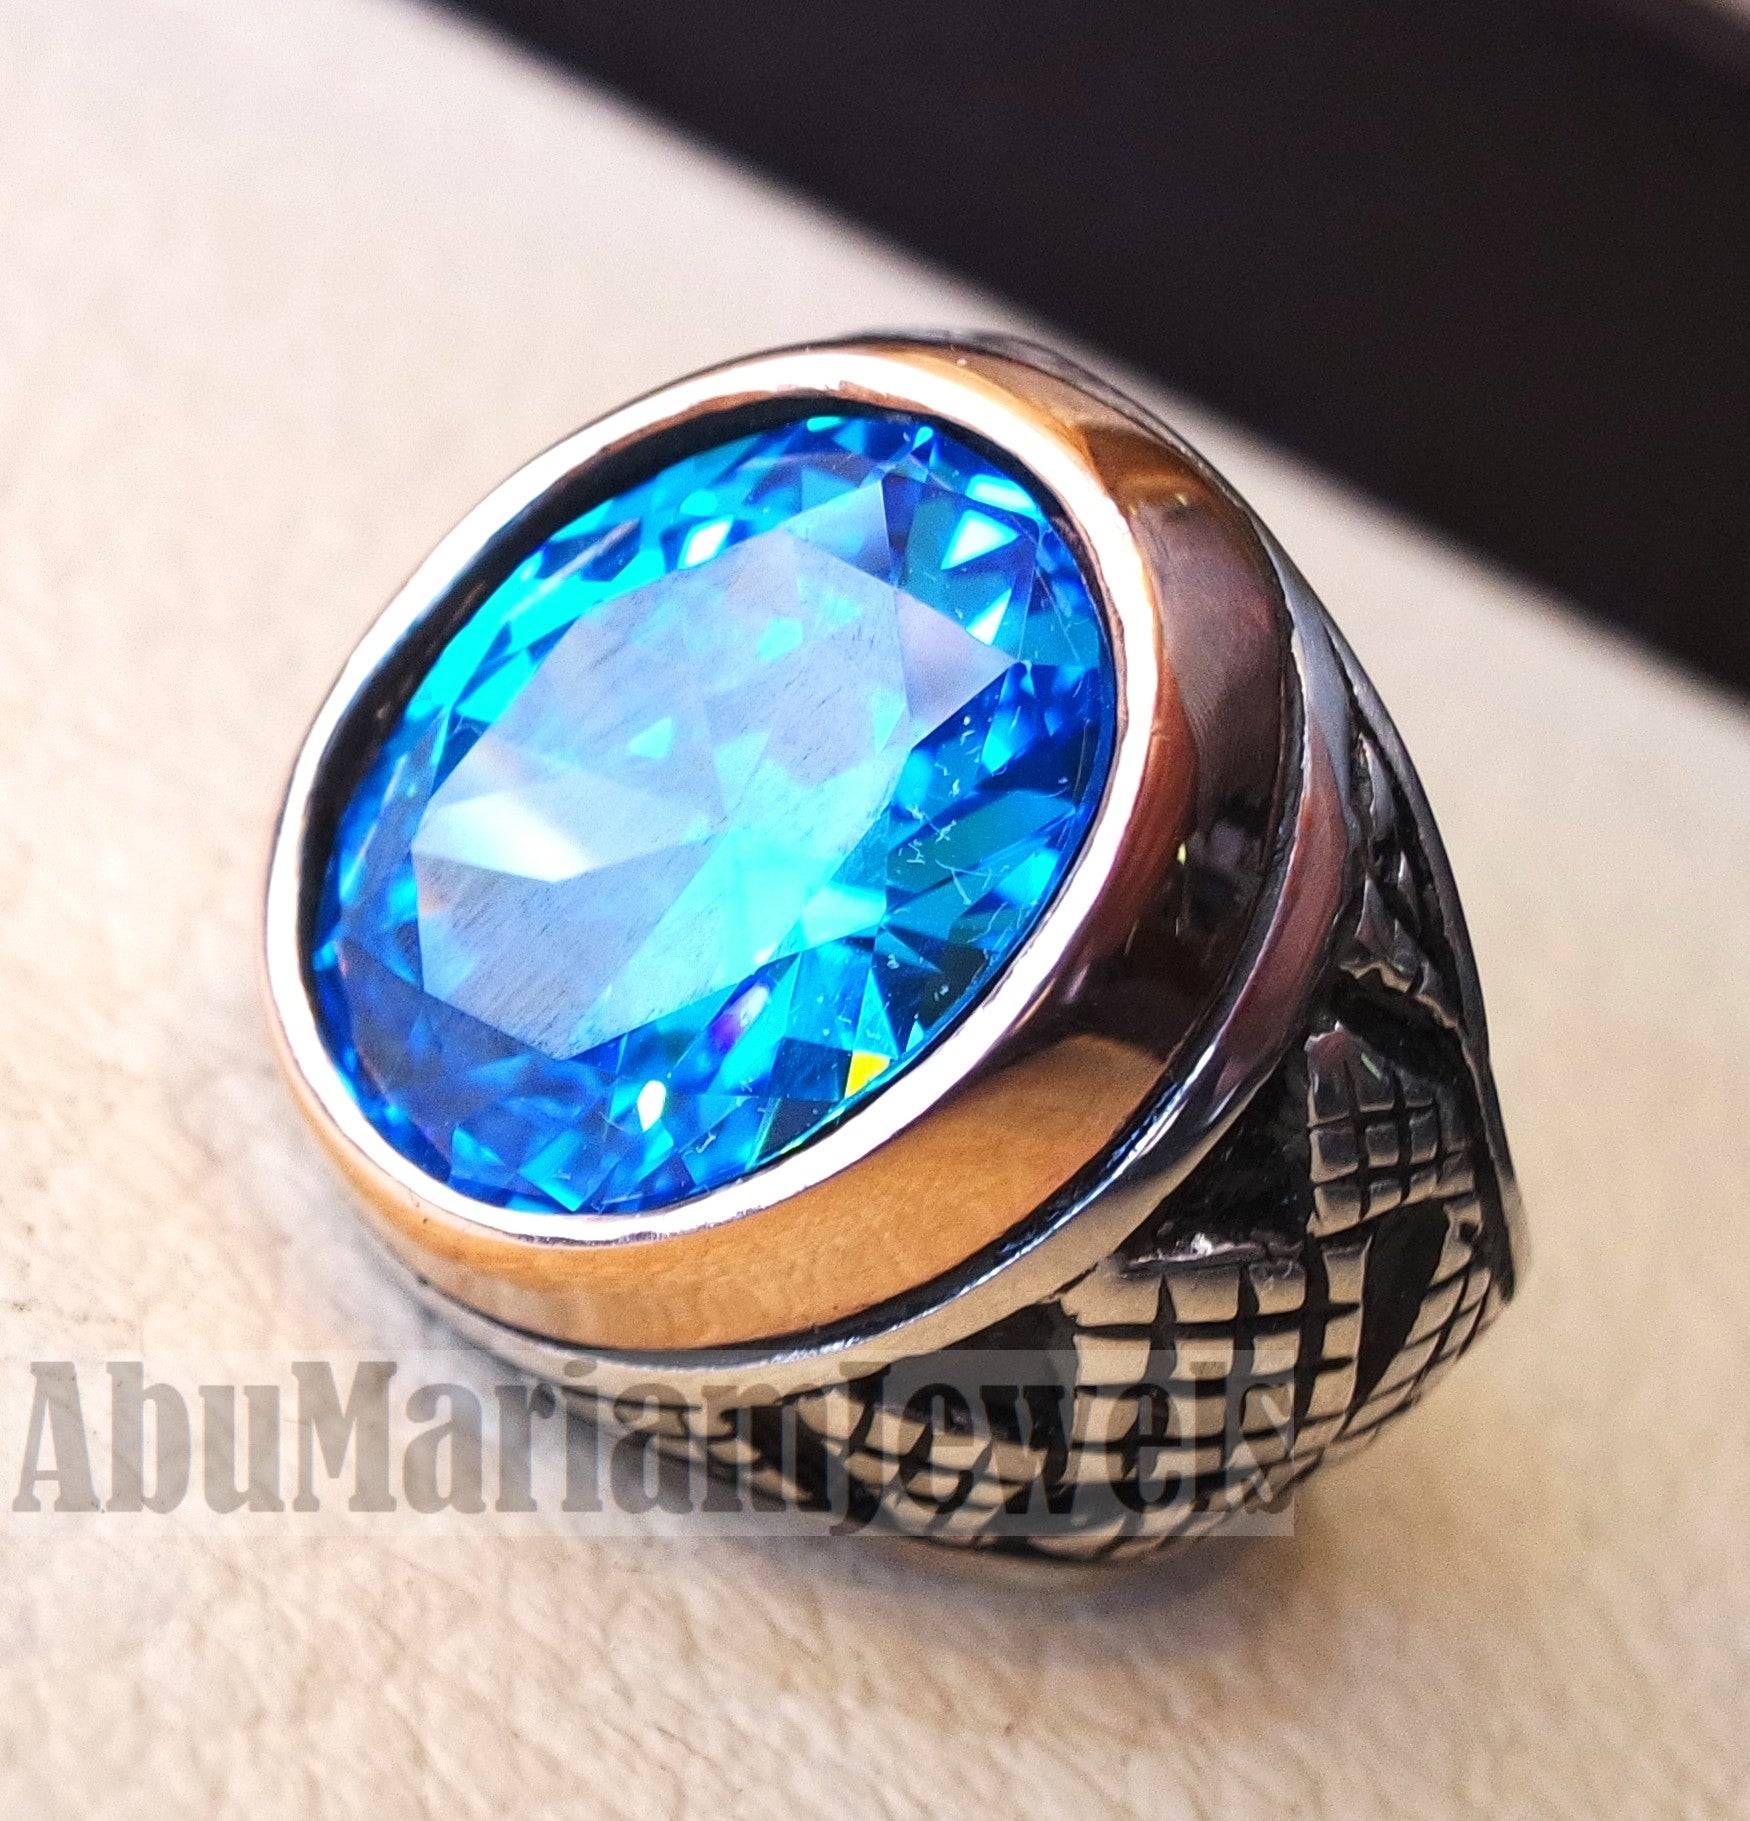 deep vivid sky blue cubic zircon oval 12 x 16 stone highest quality stone sterling silver 925 men ring and bronze frame all sizes jewelry